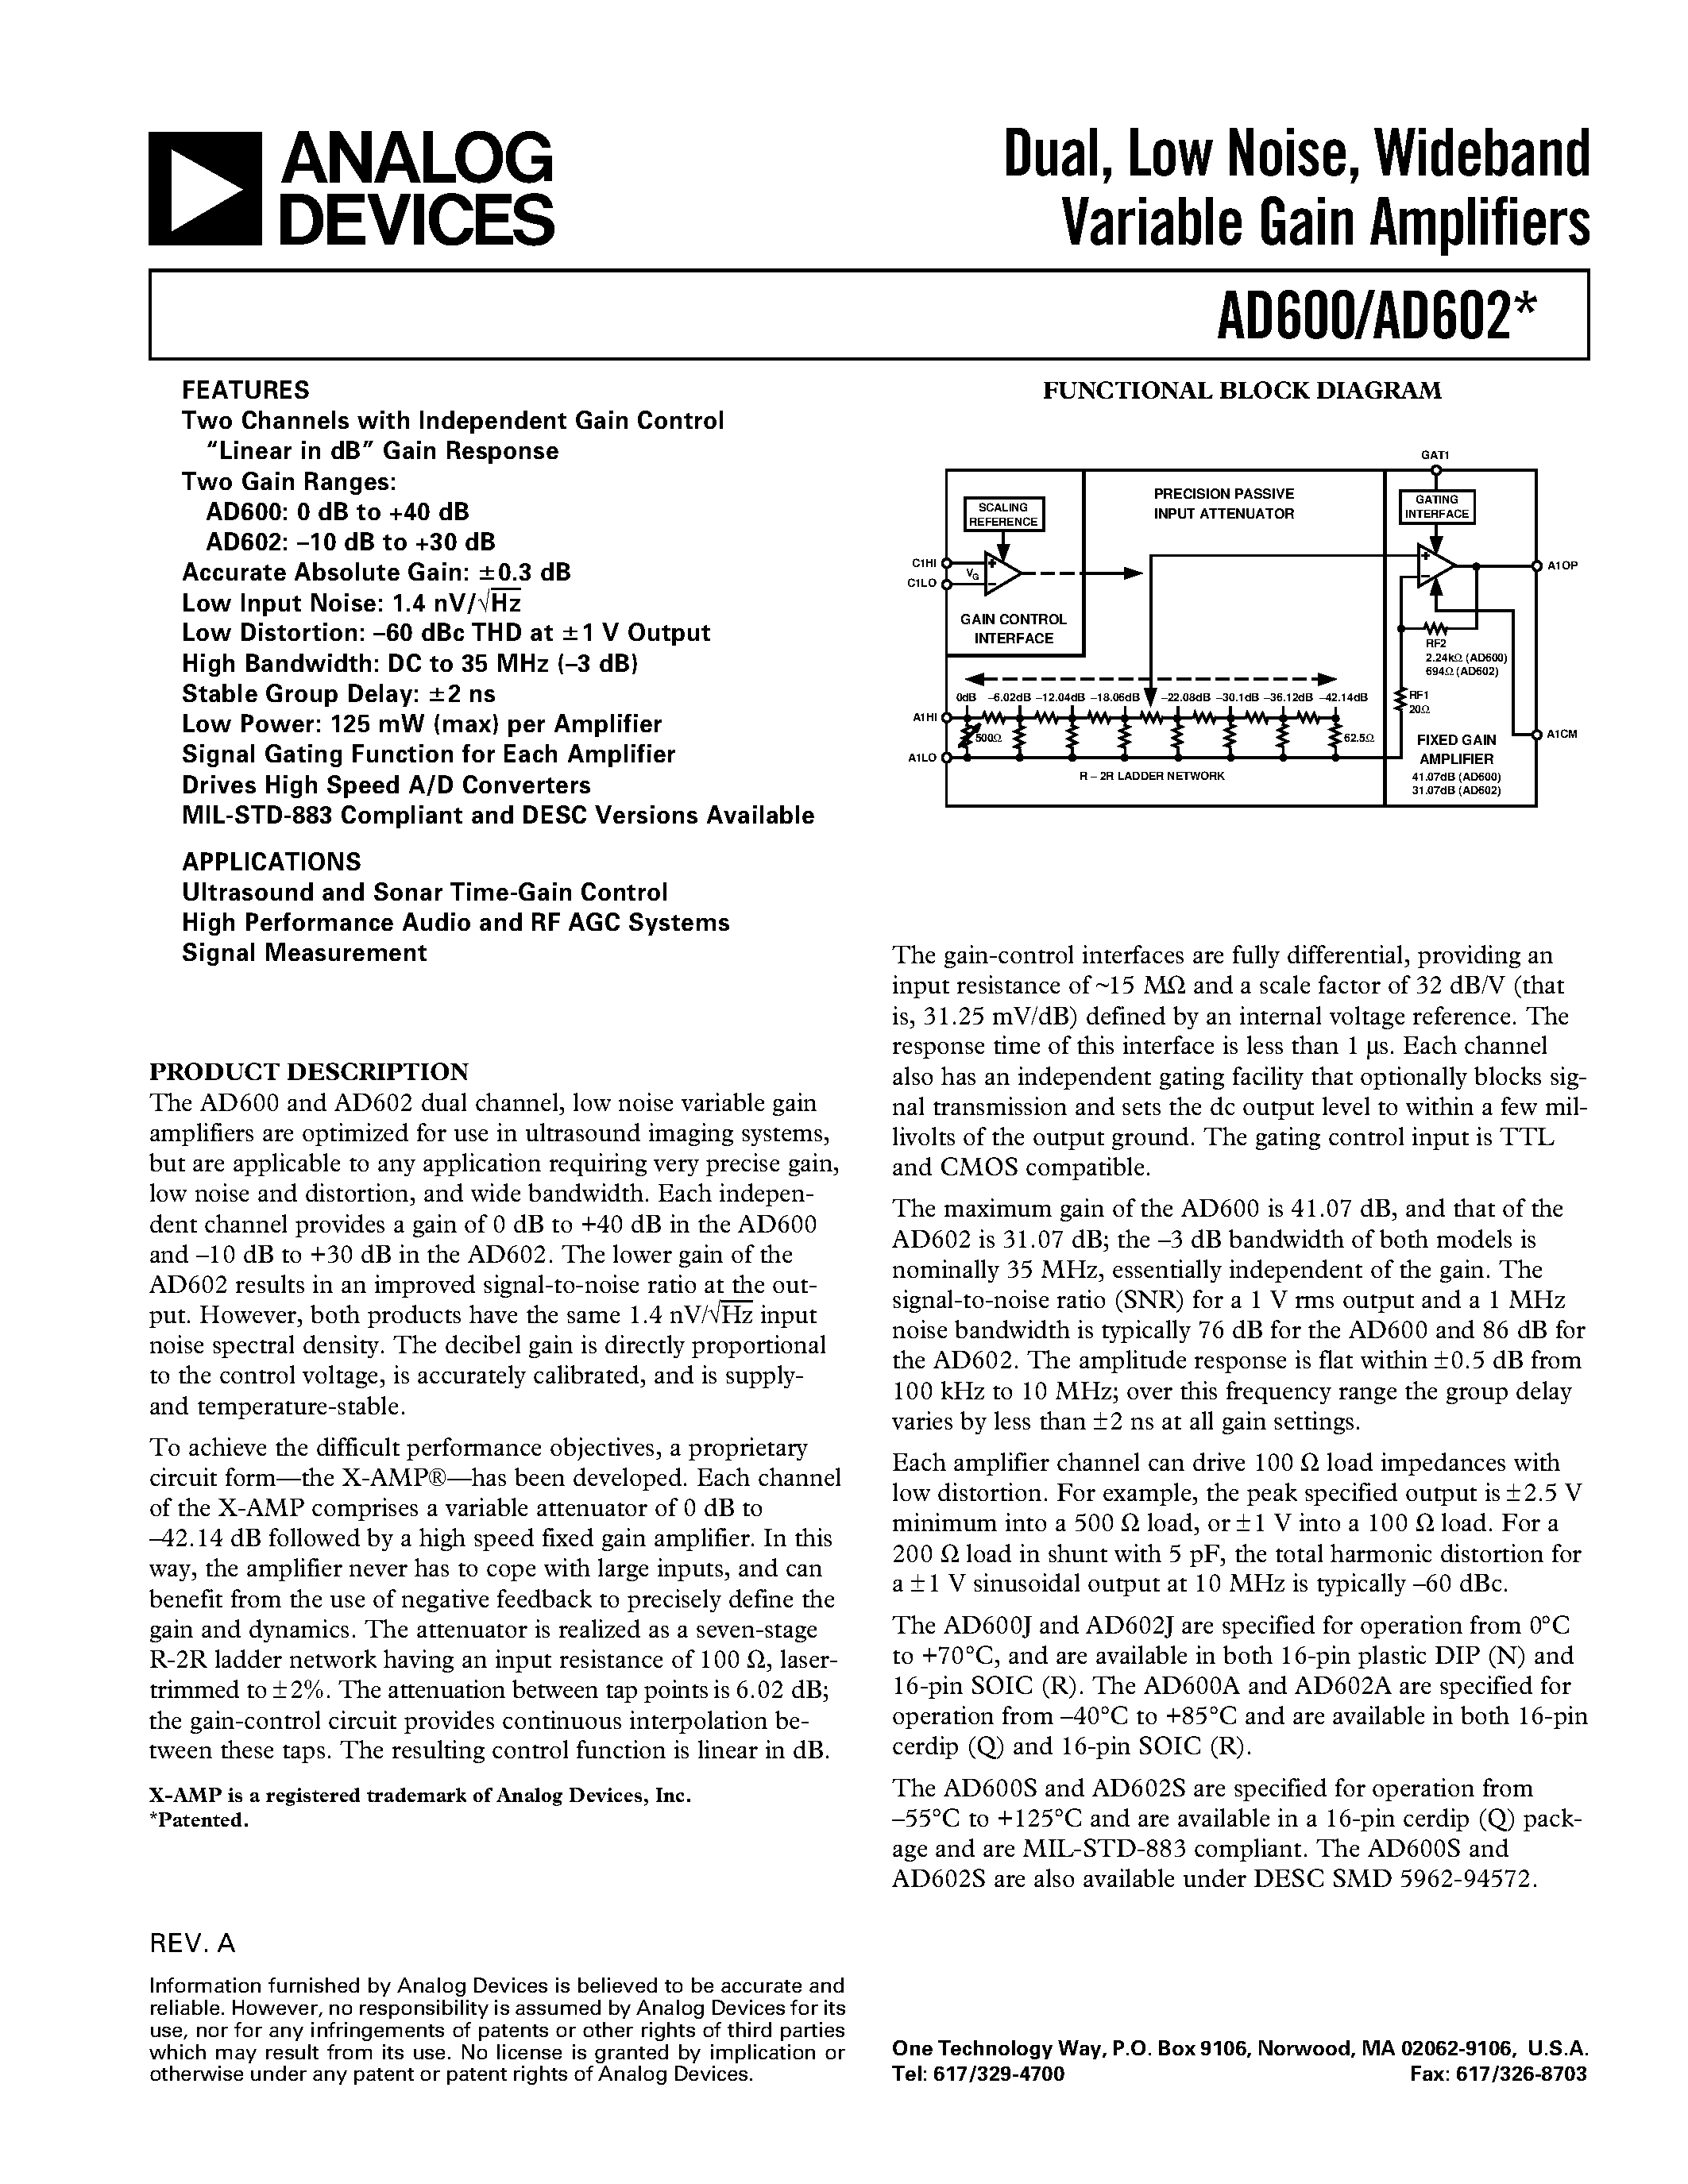 Datasheet AD600AR - Dual/ Low Noise/ Wideband Variable Gain Amplifiers page 1